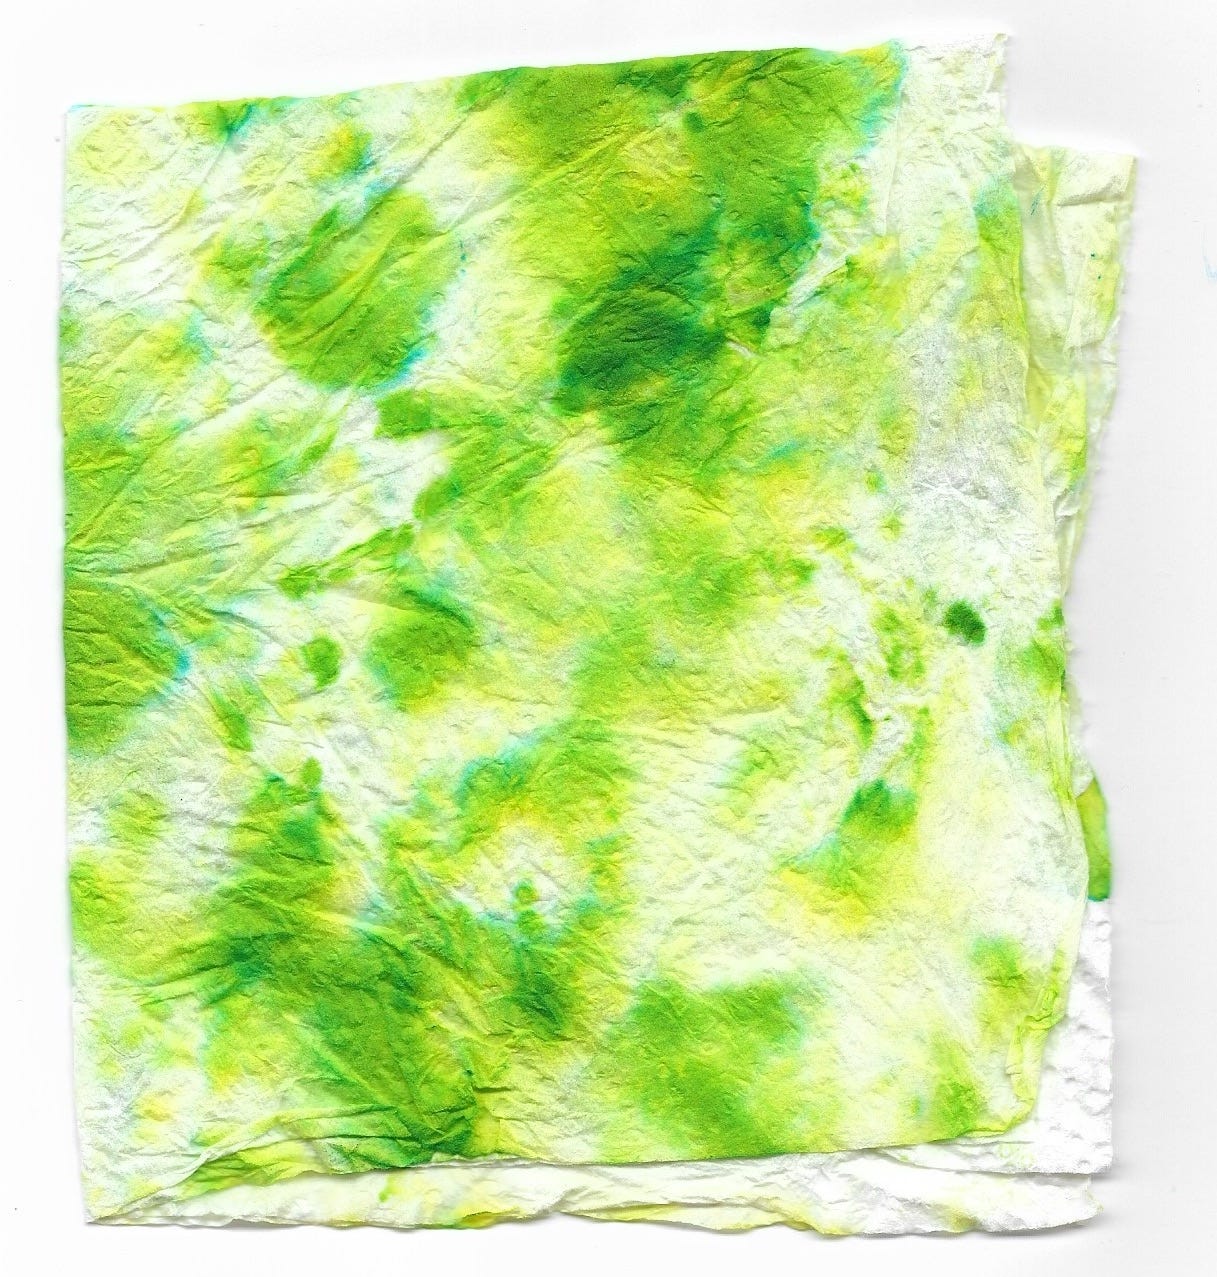 a square-ish piece of paper towel, folded over and spattered from corner to corner with ink in shades of green